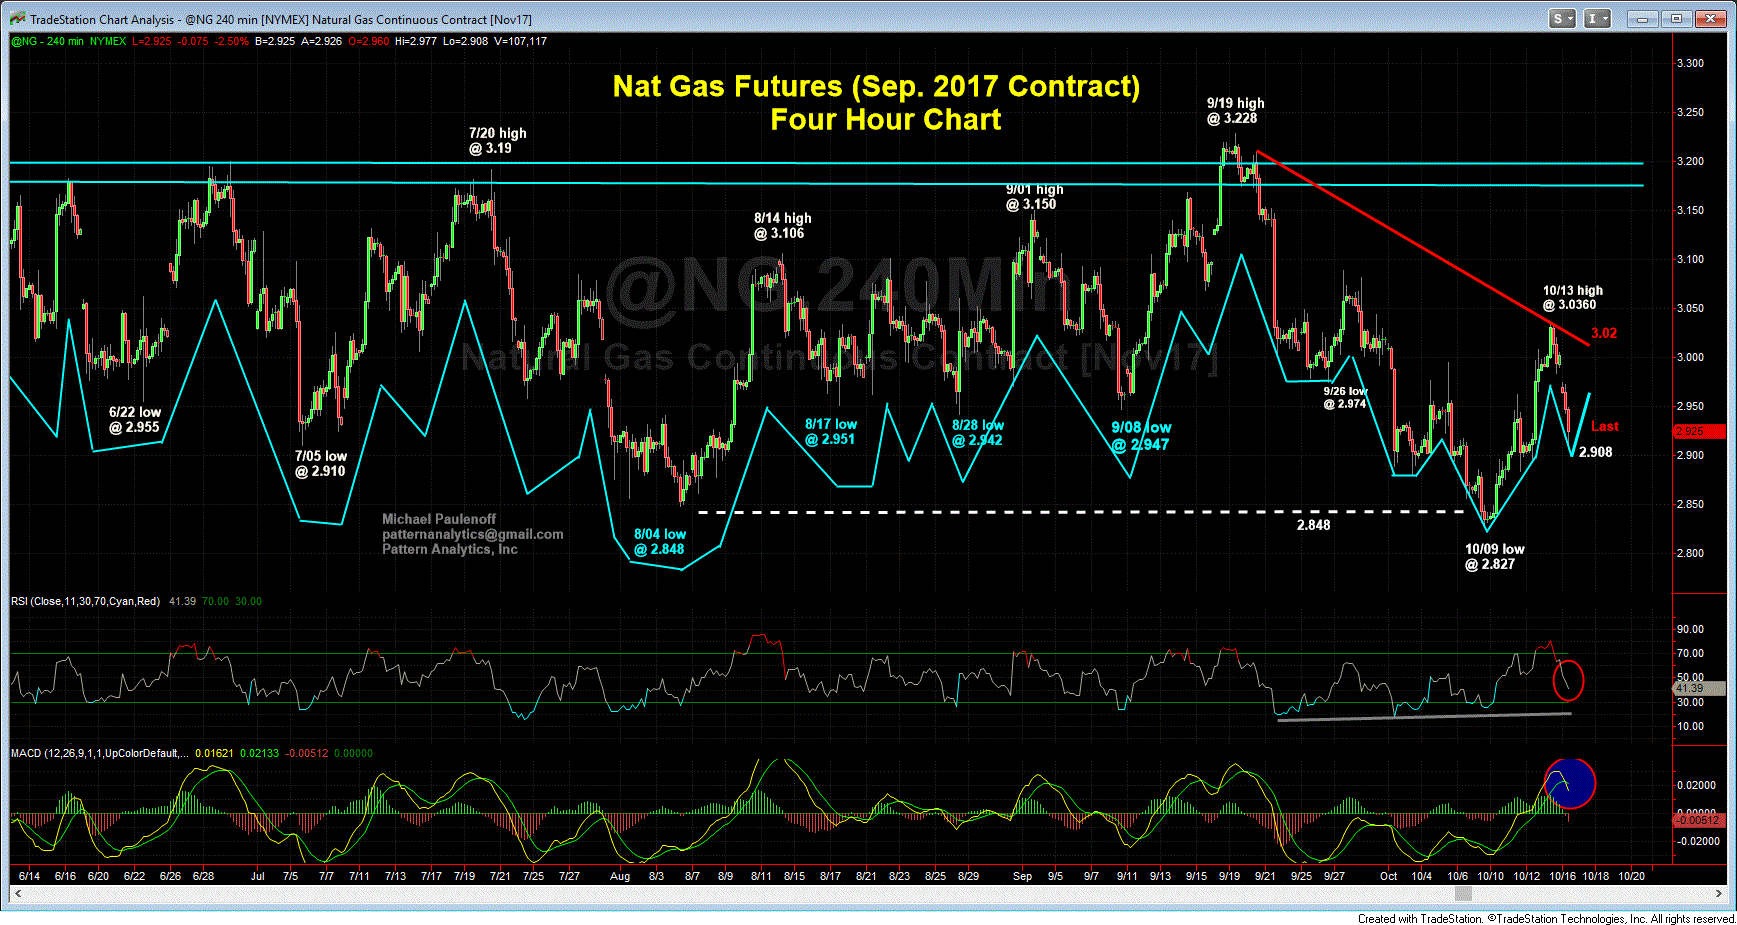 Nat Gas Futures Four Hour Chart